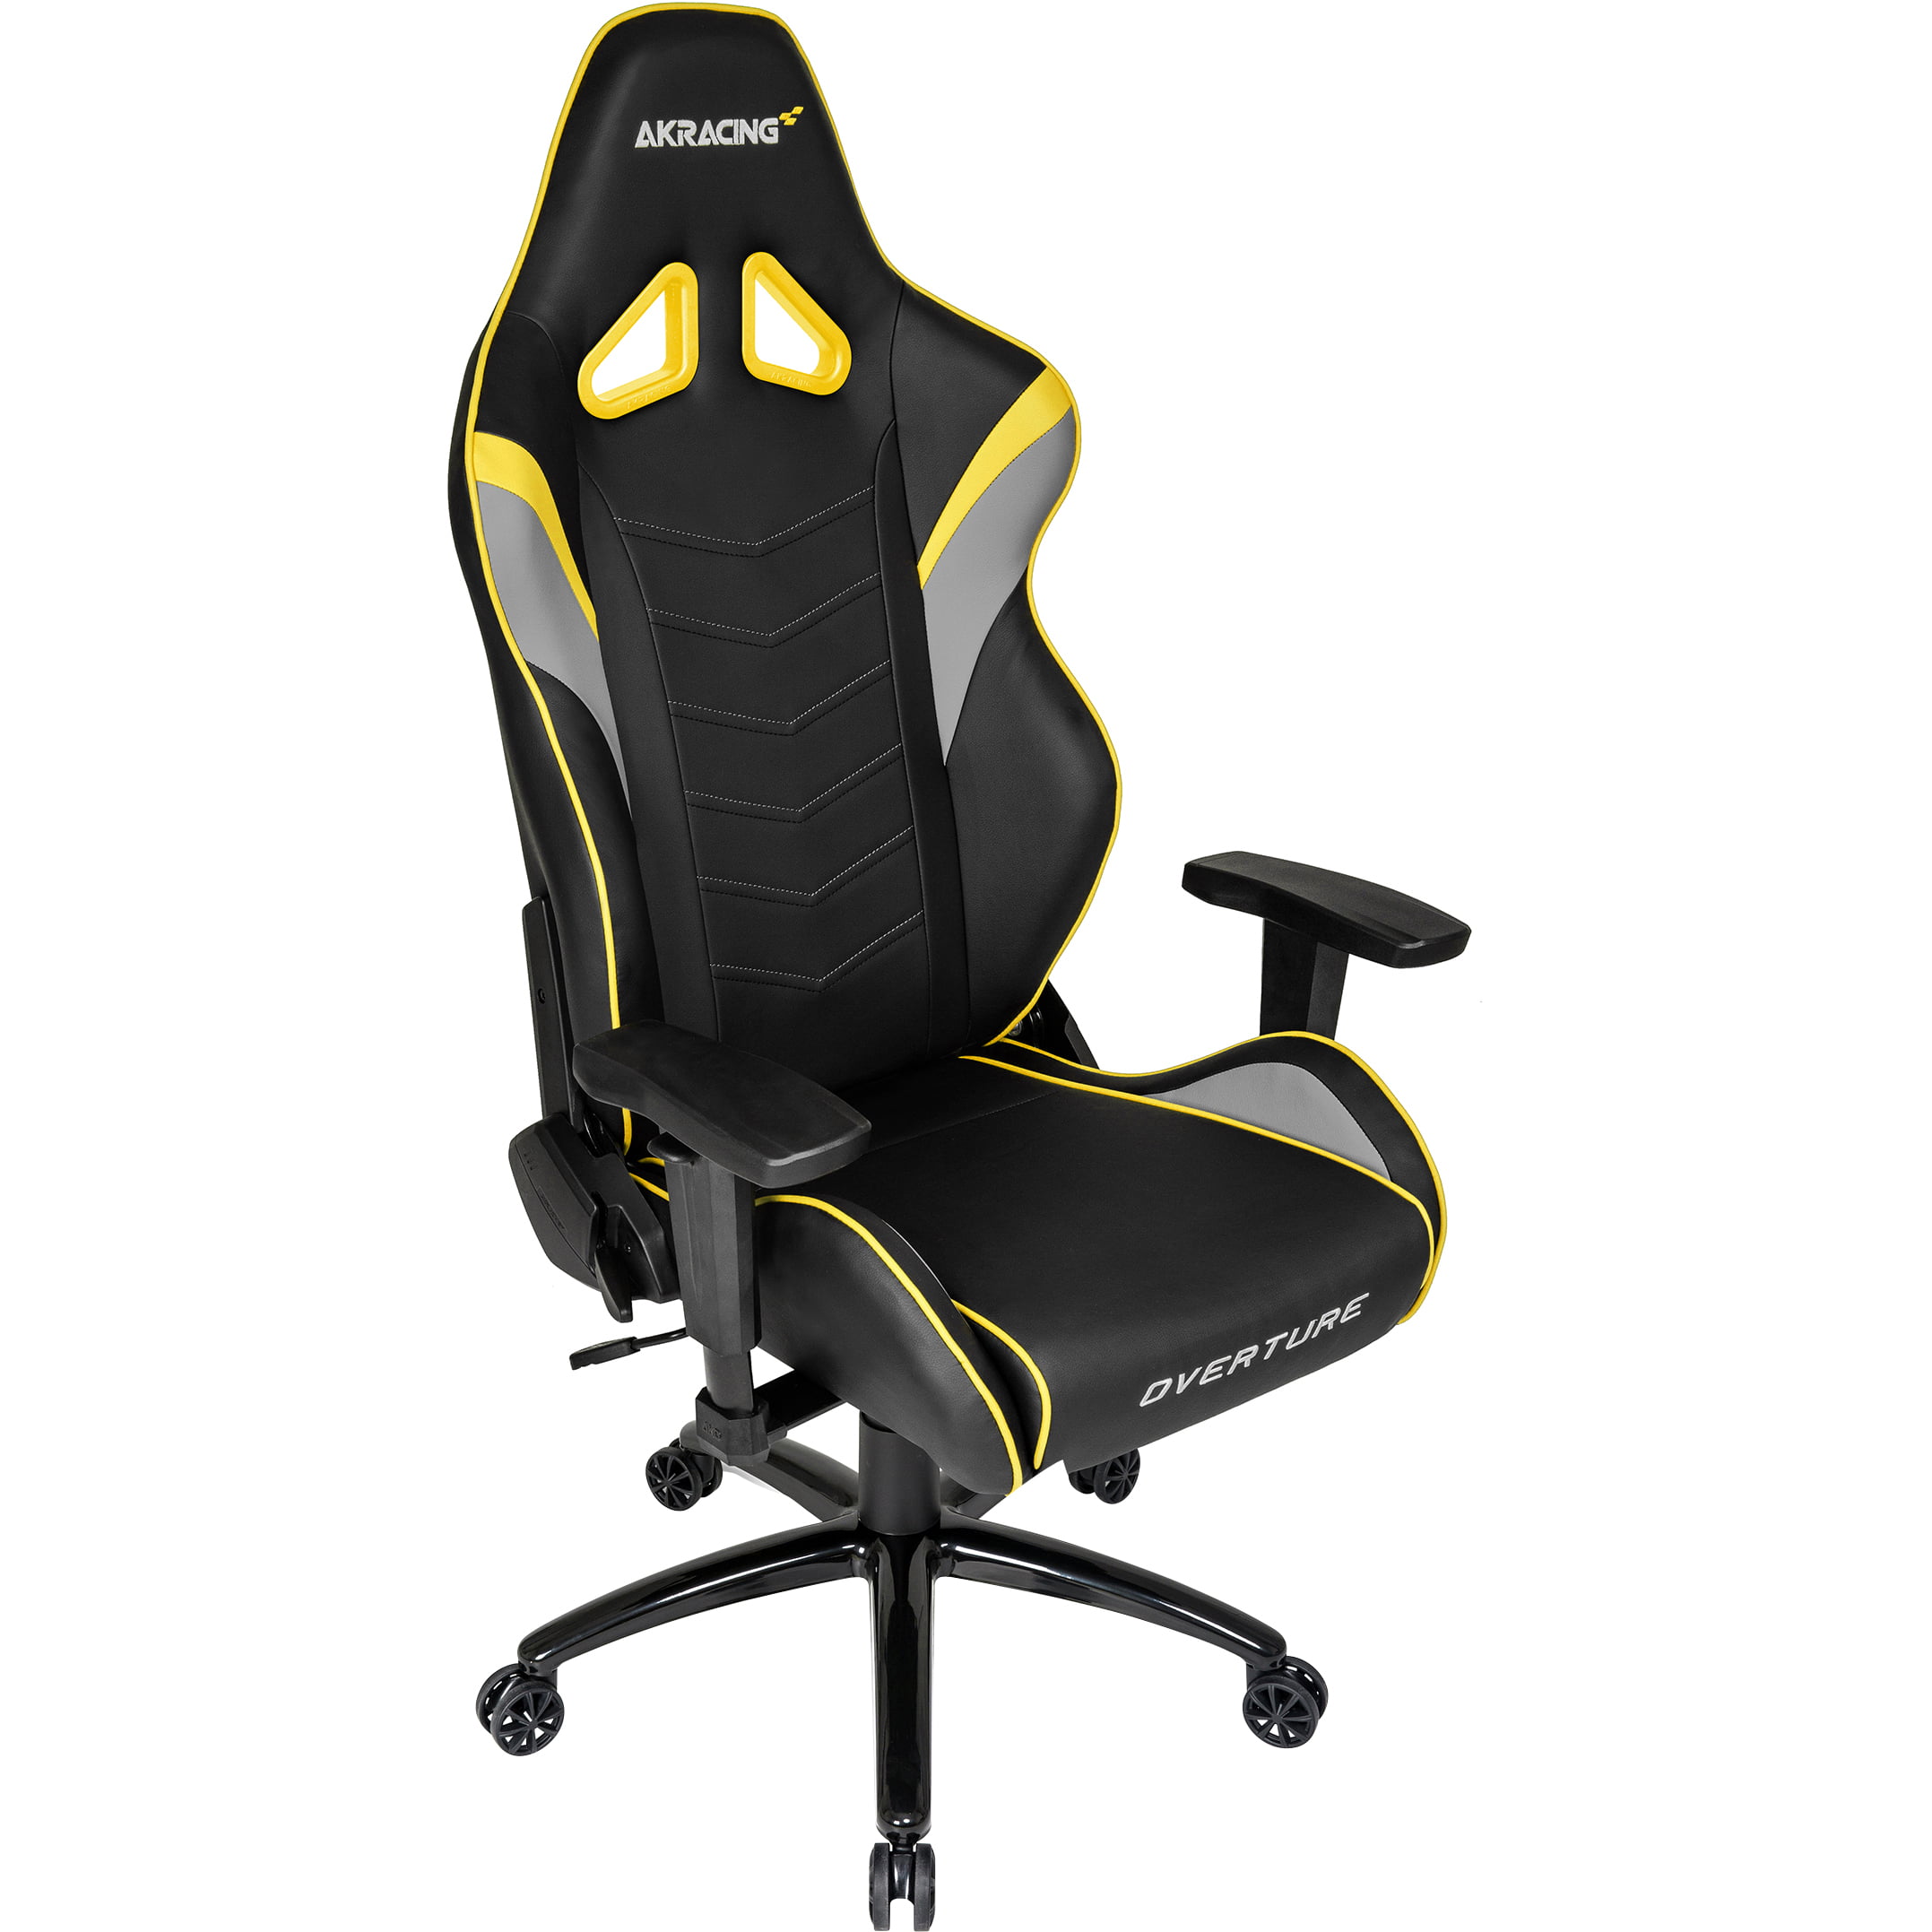 AKRacing Overture Gaming Chair, Yellow